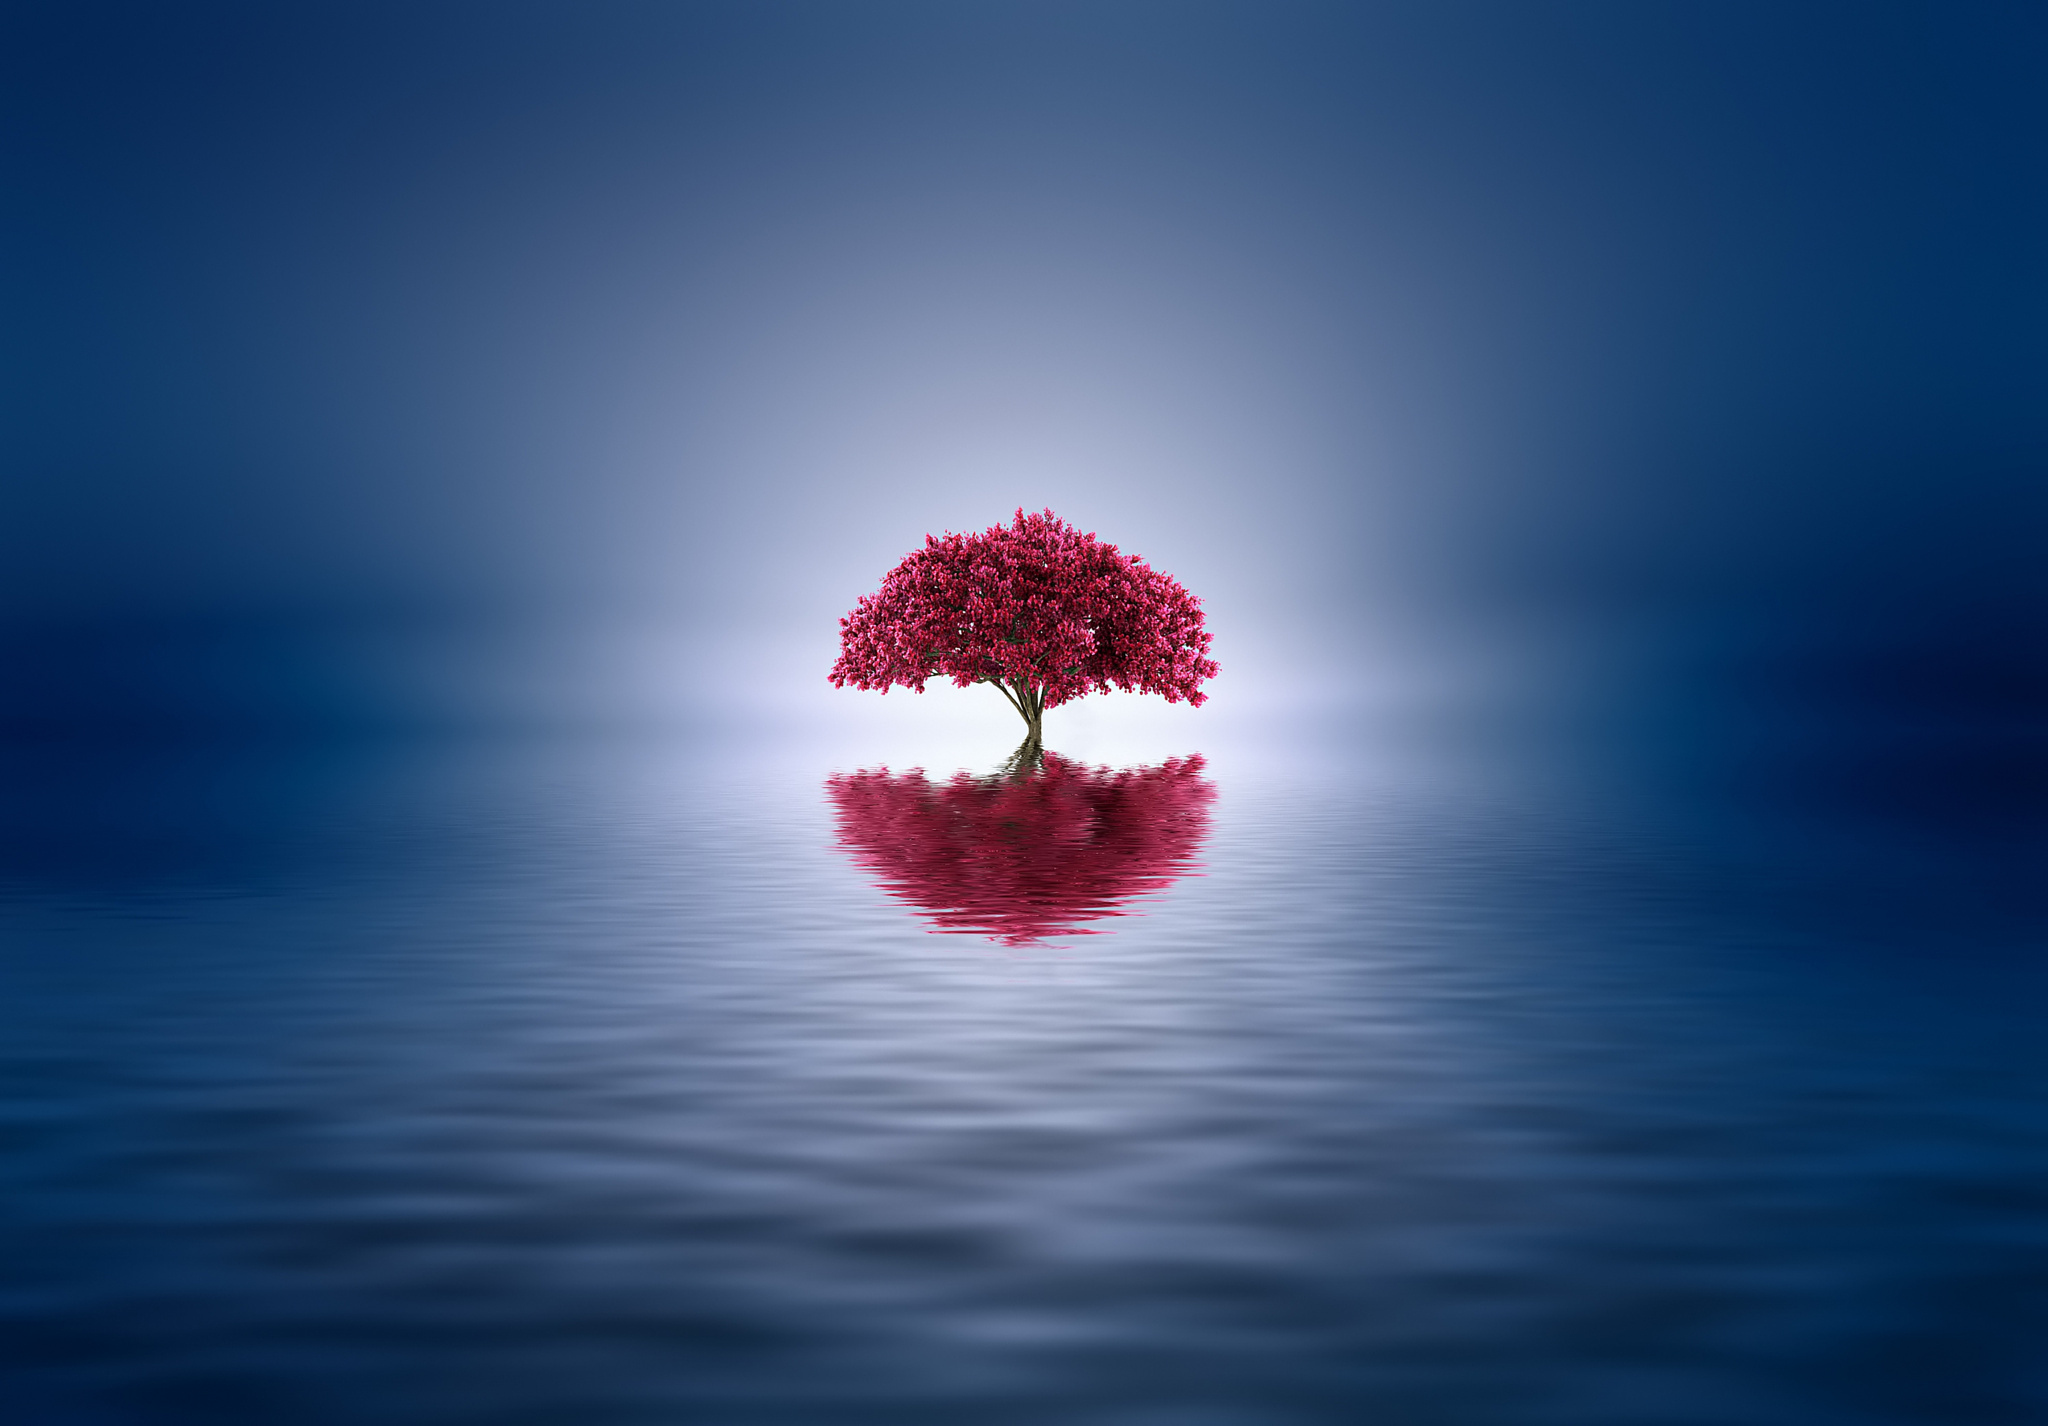 230+ Lonely Tree HD Wallpapers and Backgrounds